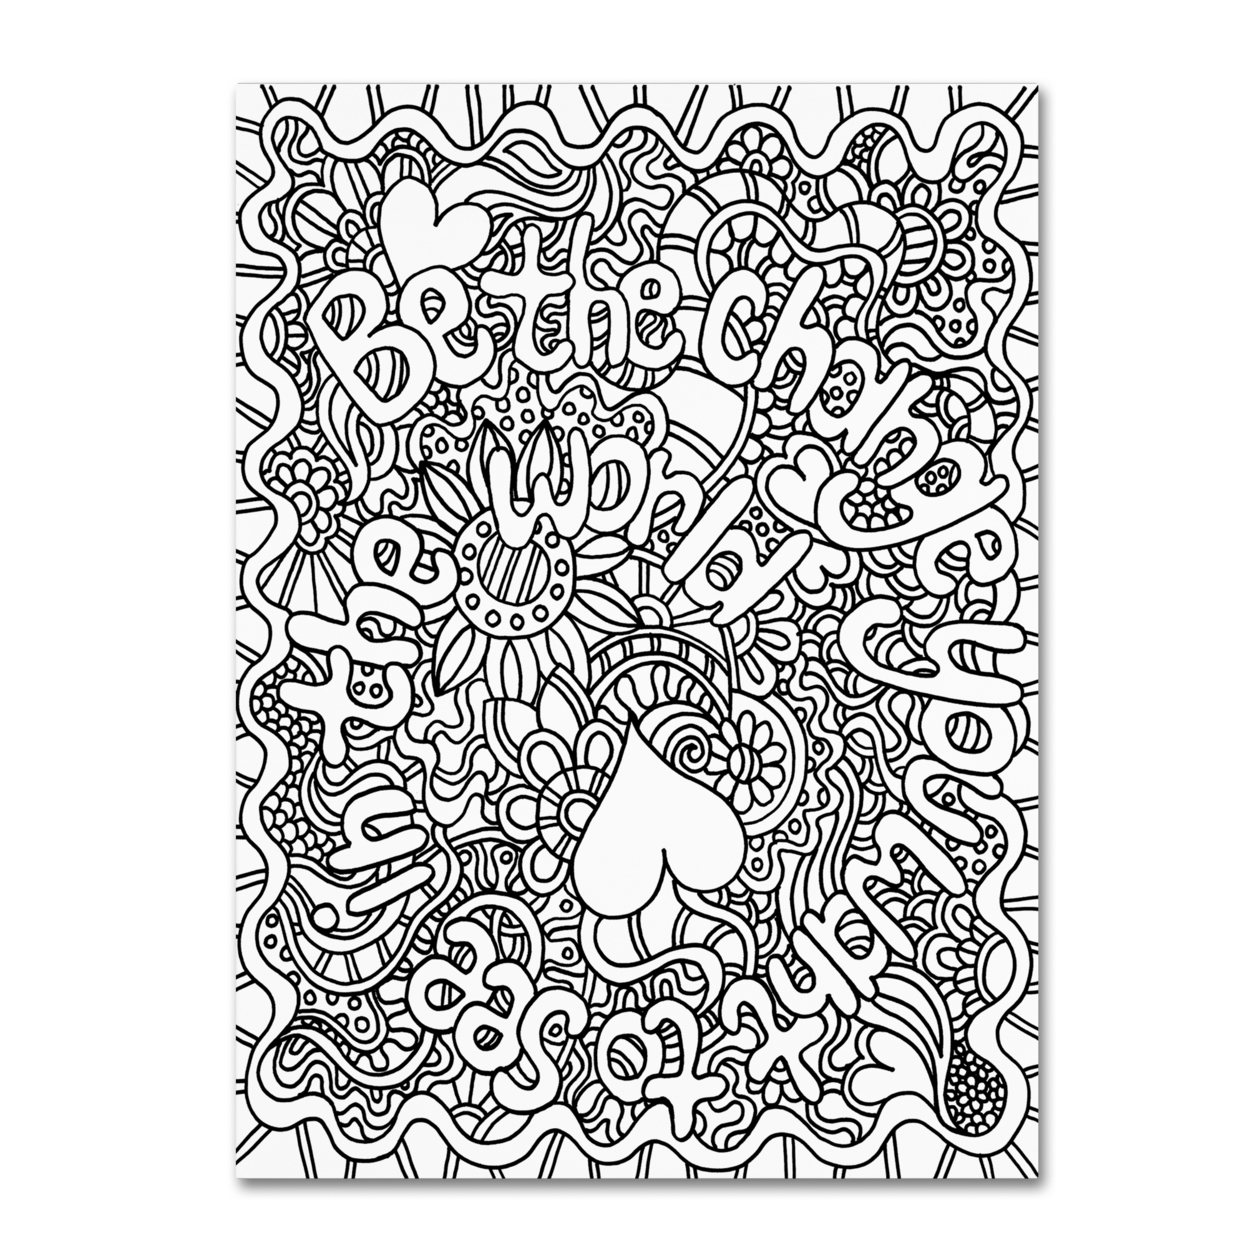 Kathy G. Ahrens 'Mixed Coloring Book 40' Canvas Wall Art 35 X 47 Inches